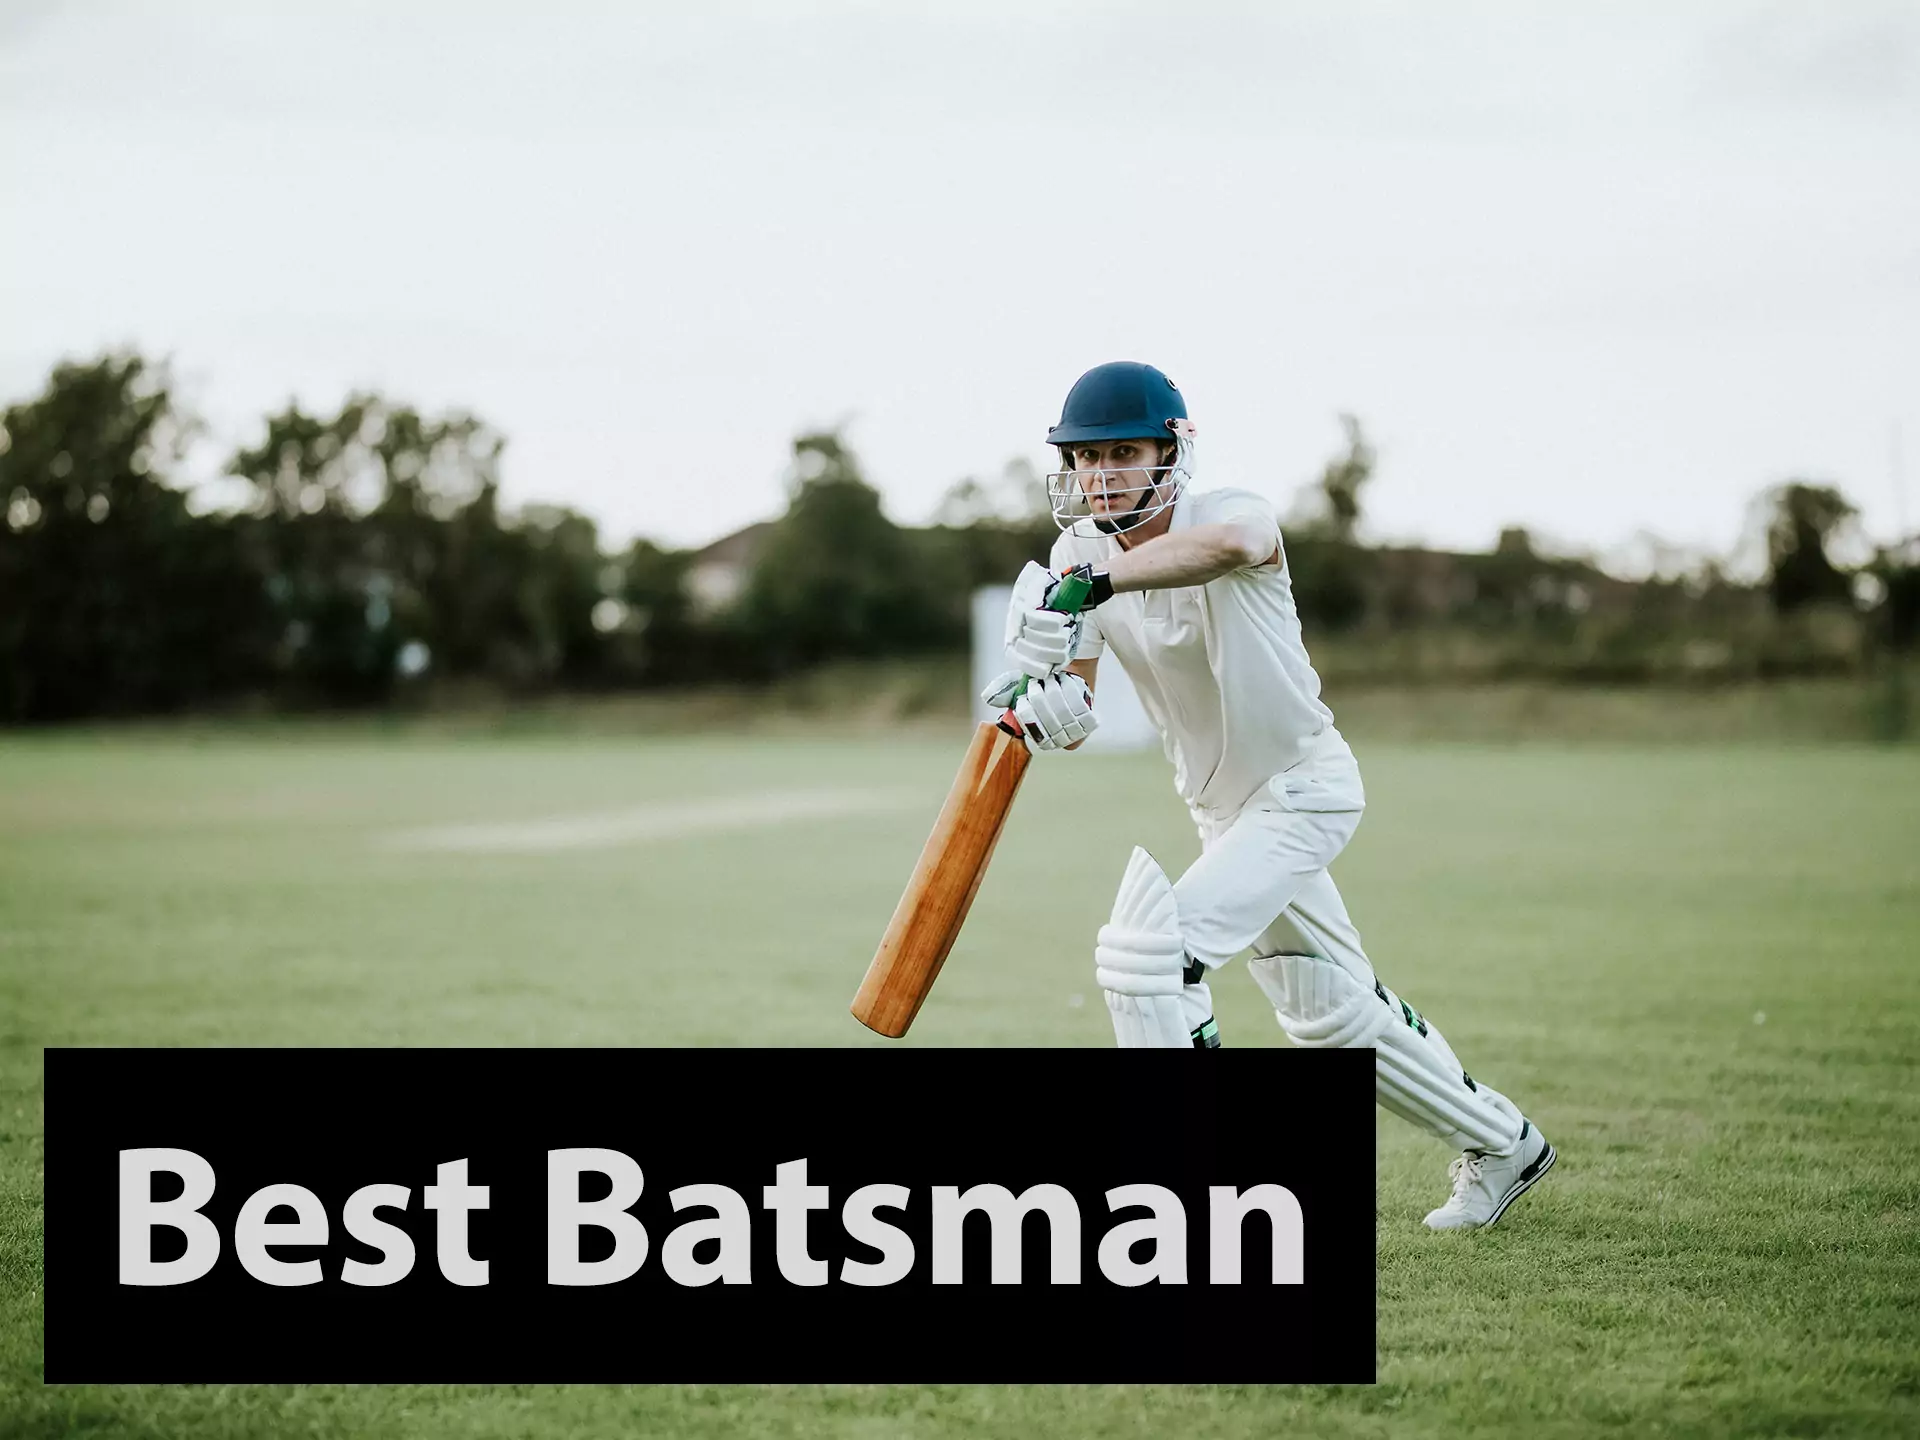 You can place a bet on the best batsman at Betway.